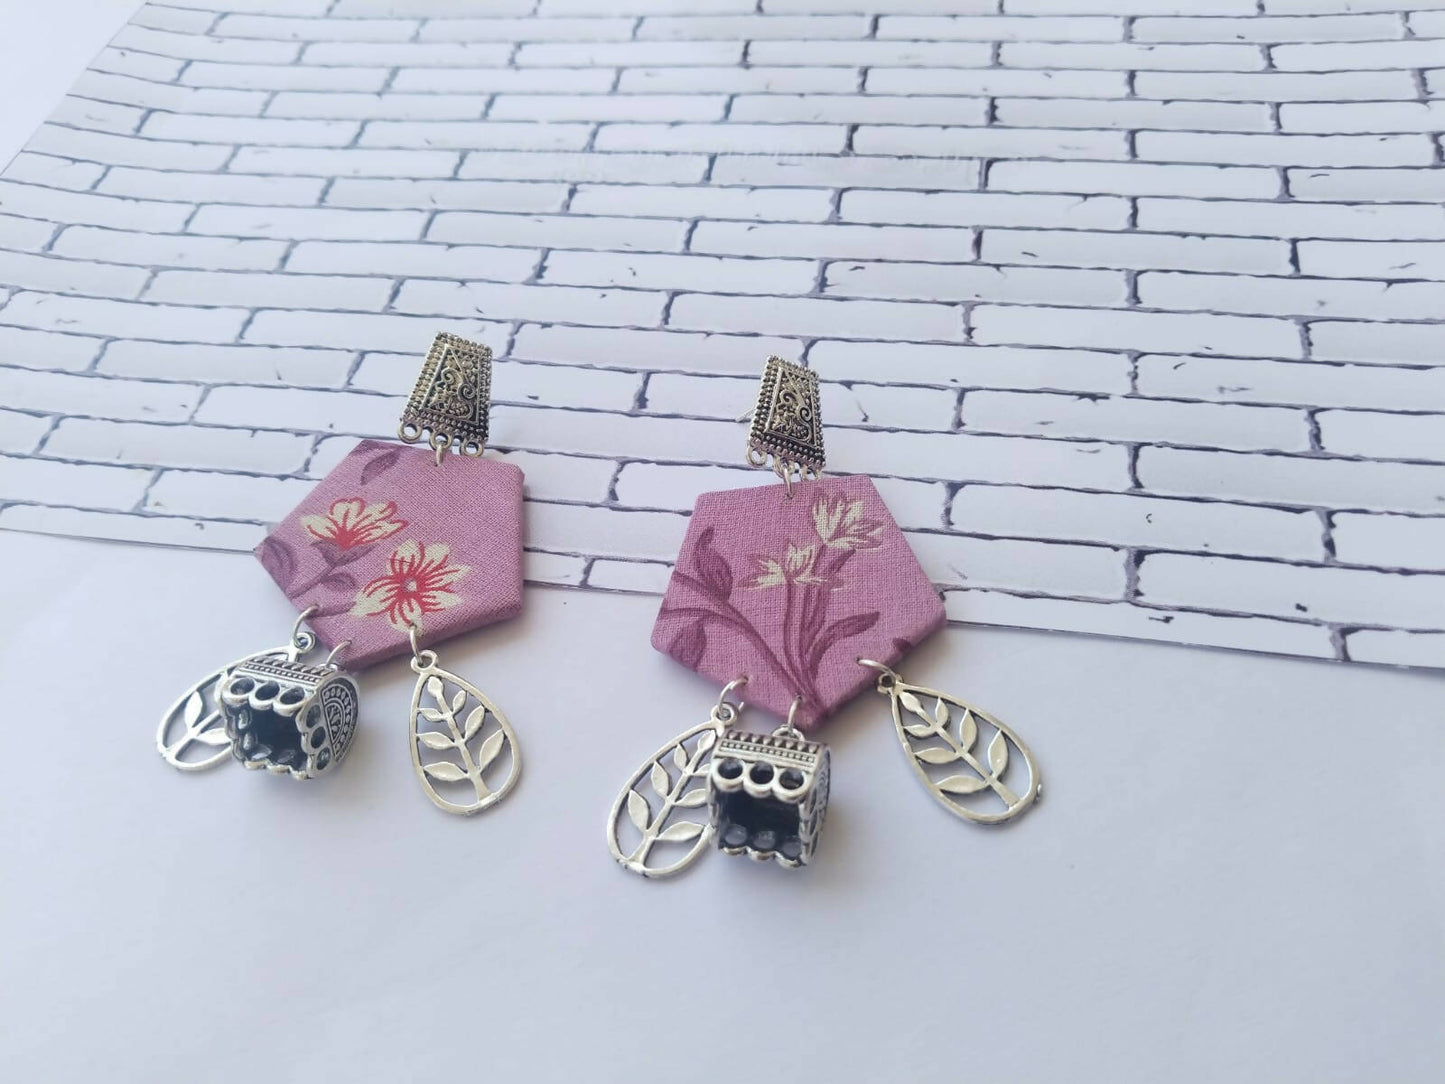 Purple Printed Floral Earrings with Silver Charm Bottom